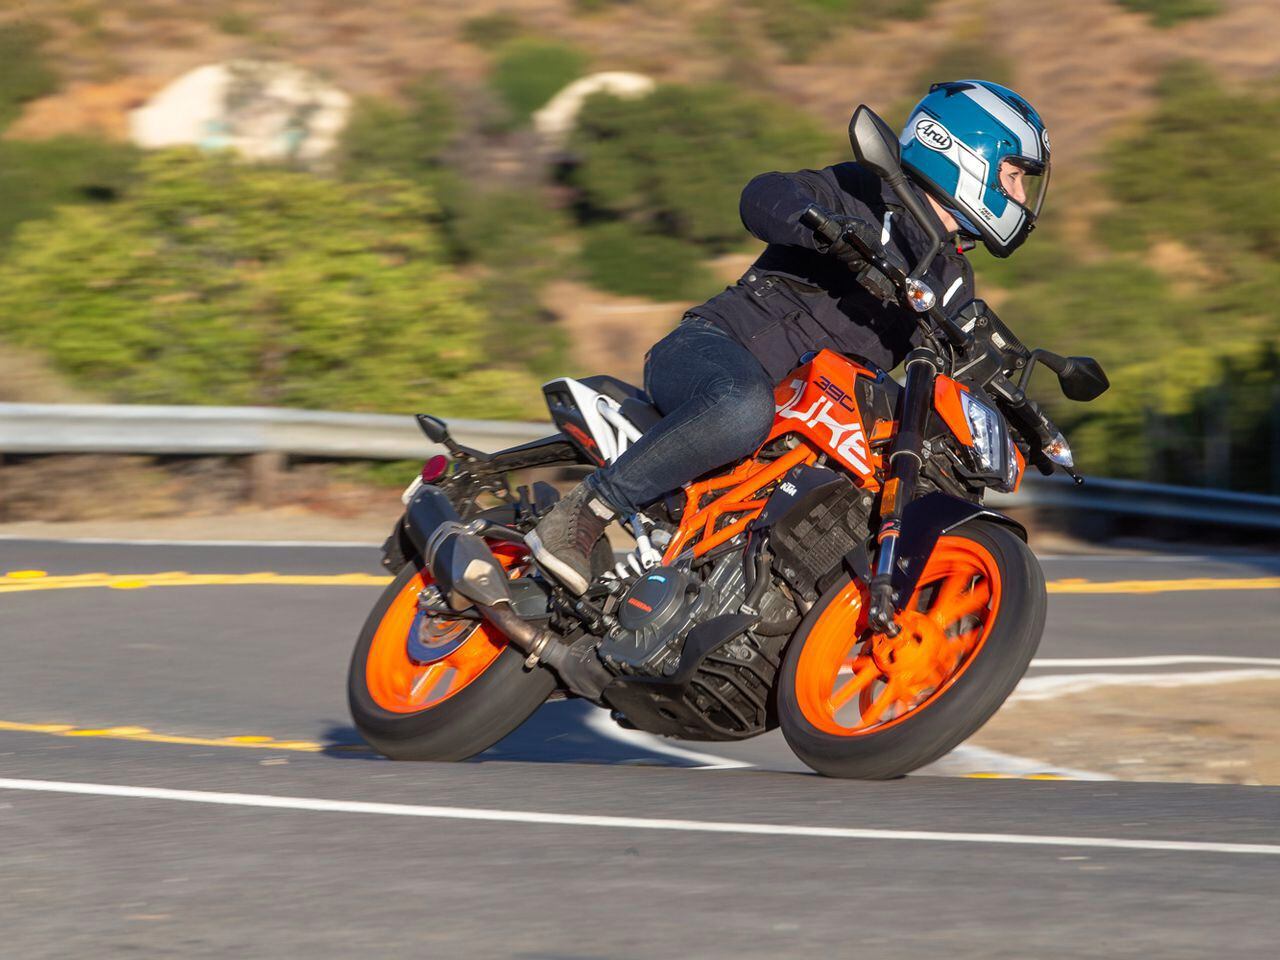 Bring on the canyons. The 390 Duke is lightweight and fun for zipping around.